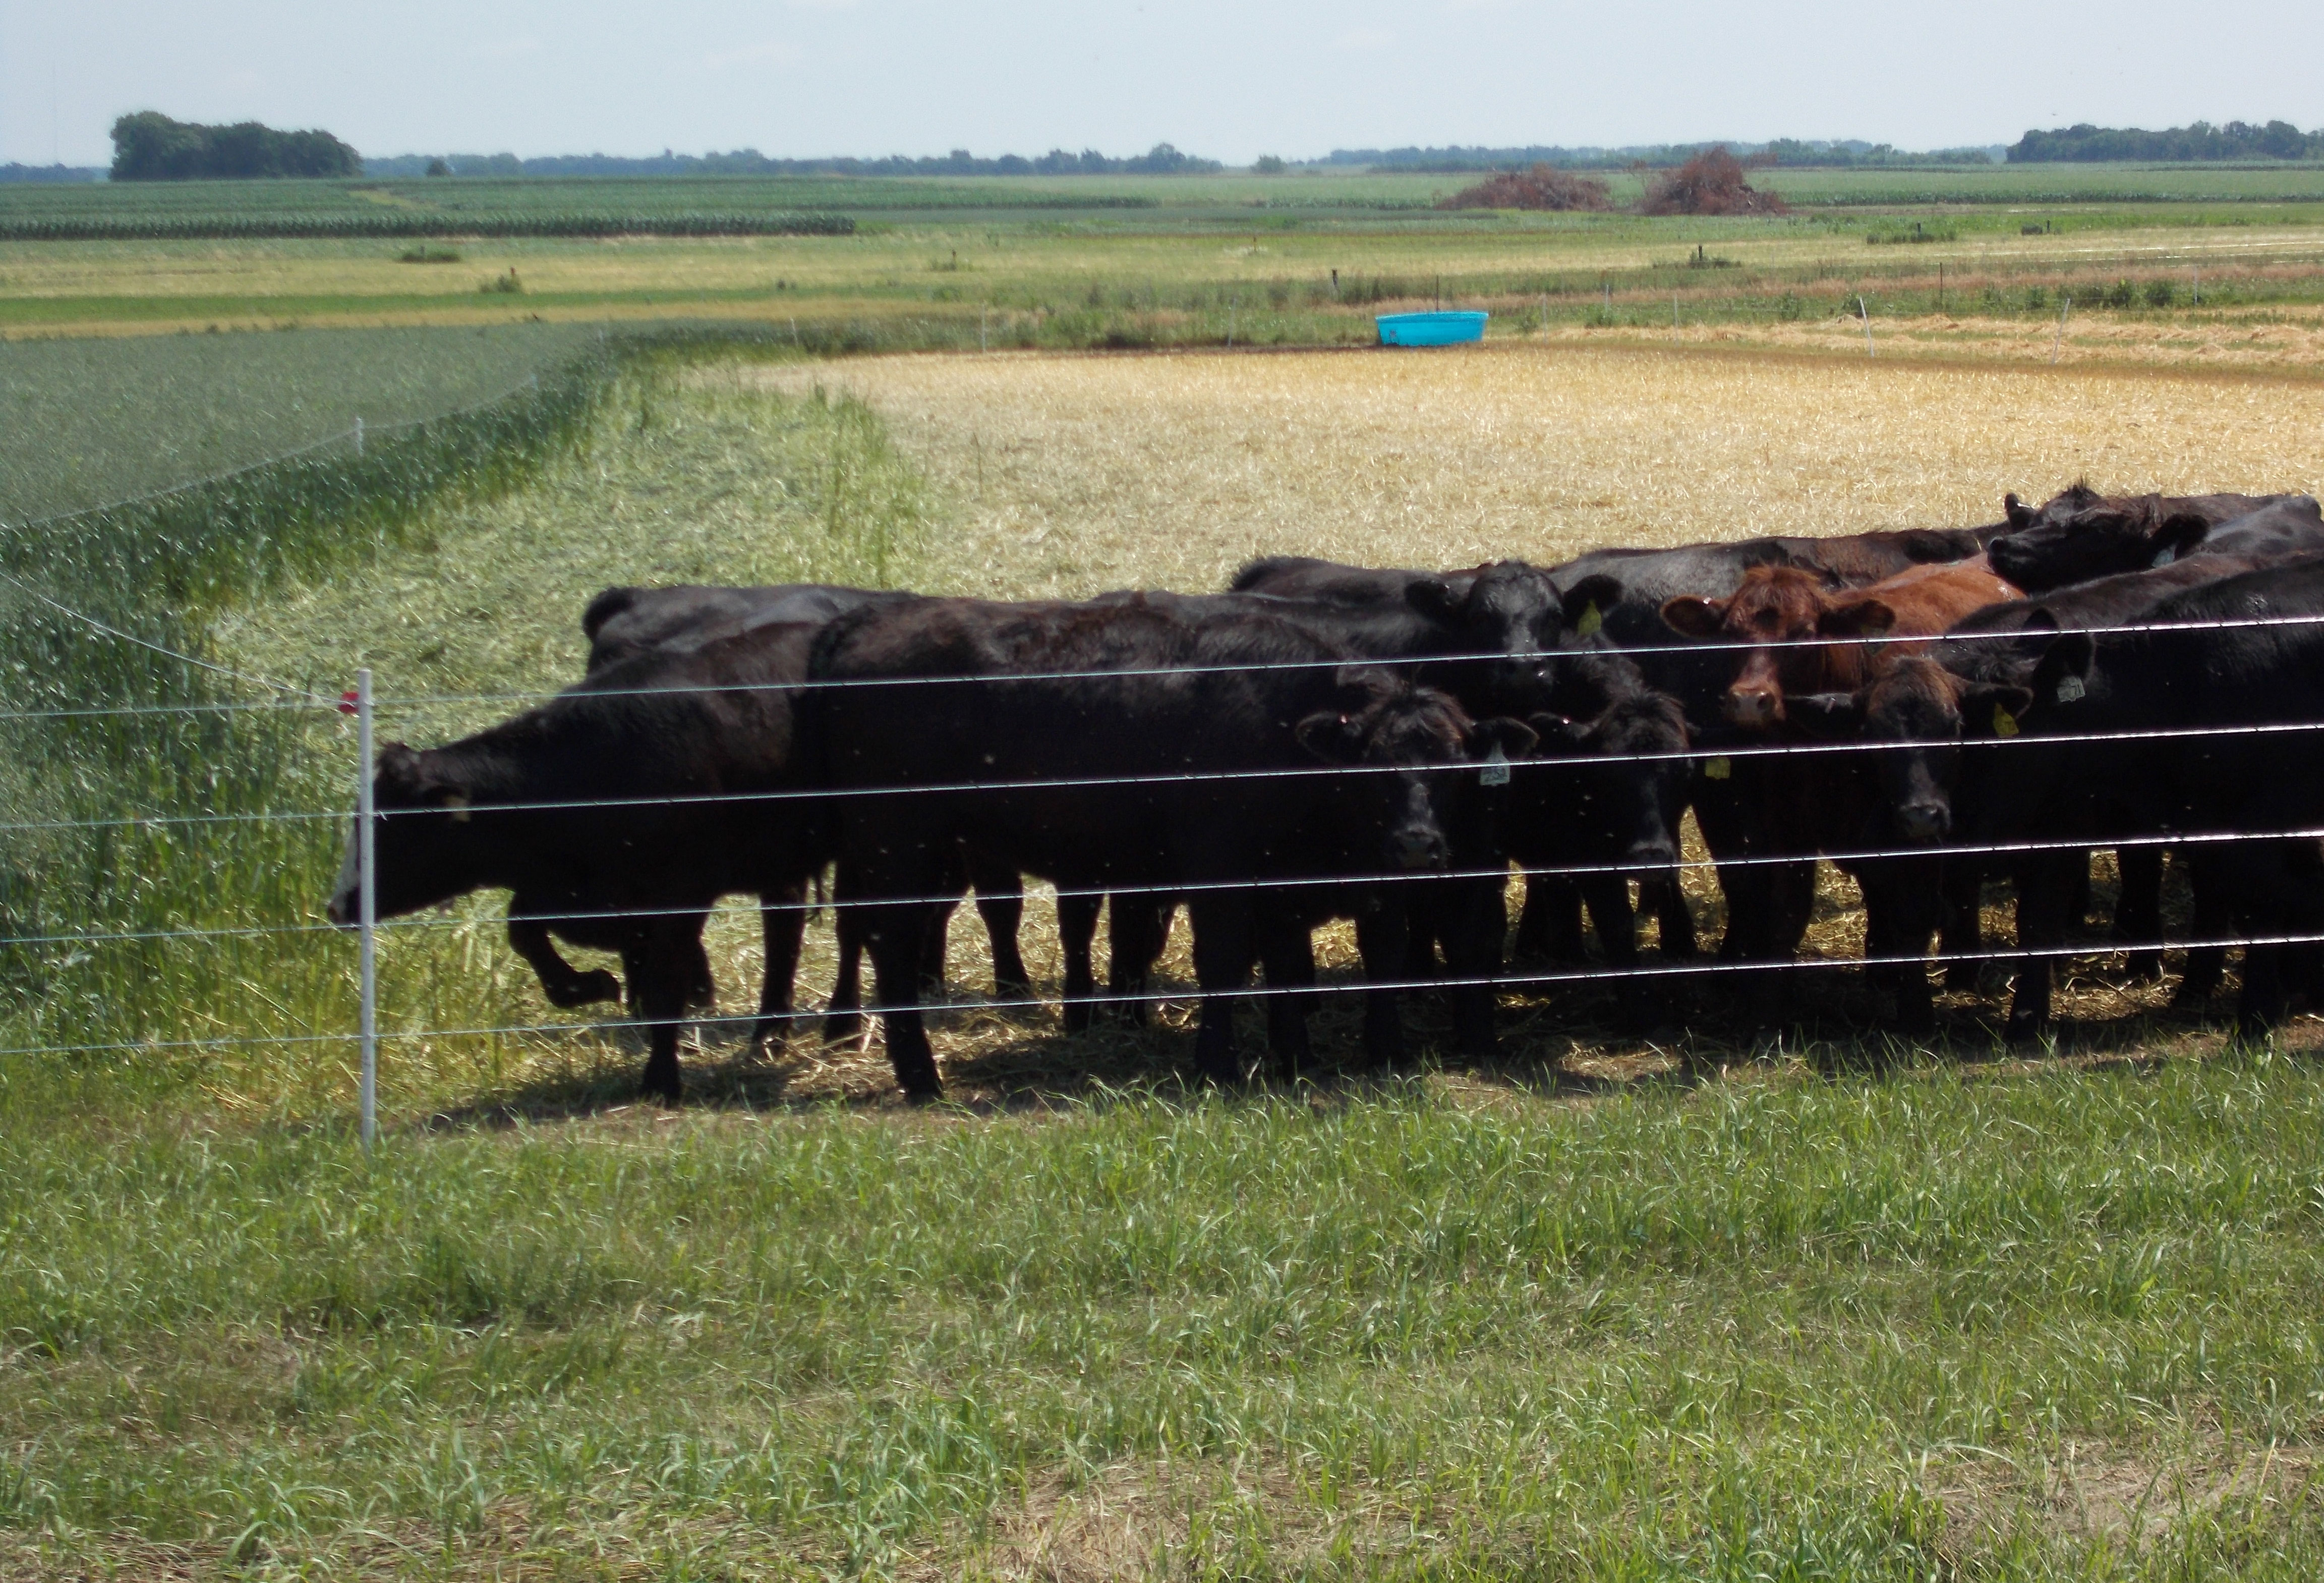 Group of calves grazing in a fenced-in area.